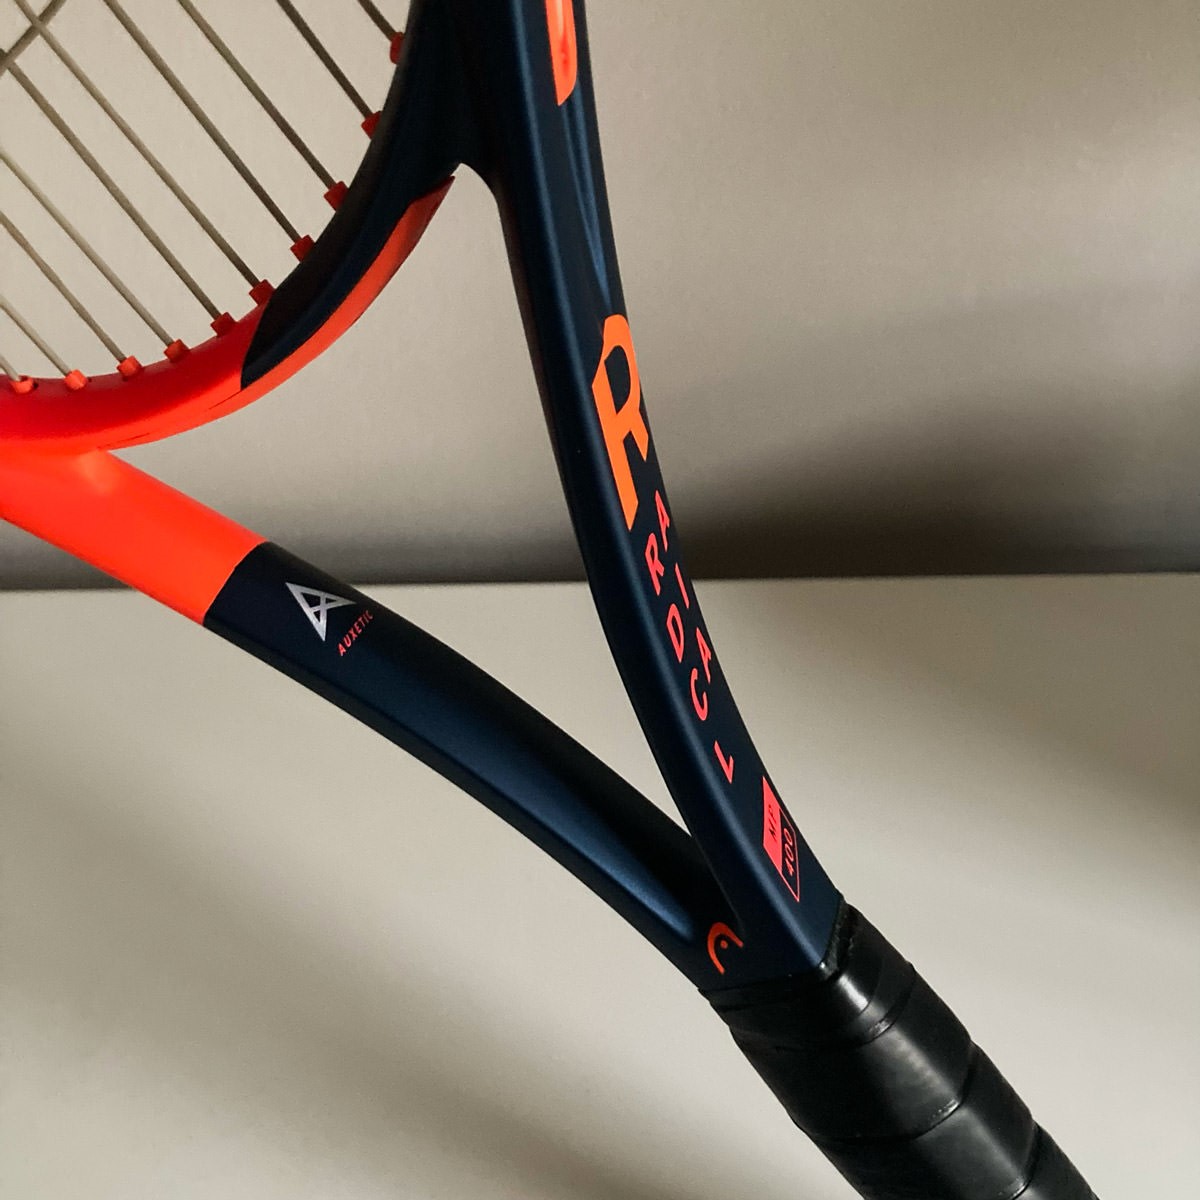 Superfried – Walk the Talk. Buying a tennis racket – Head Radical MP. Considering purchases to reducing my environmental impact. 